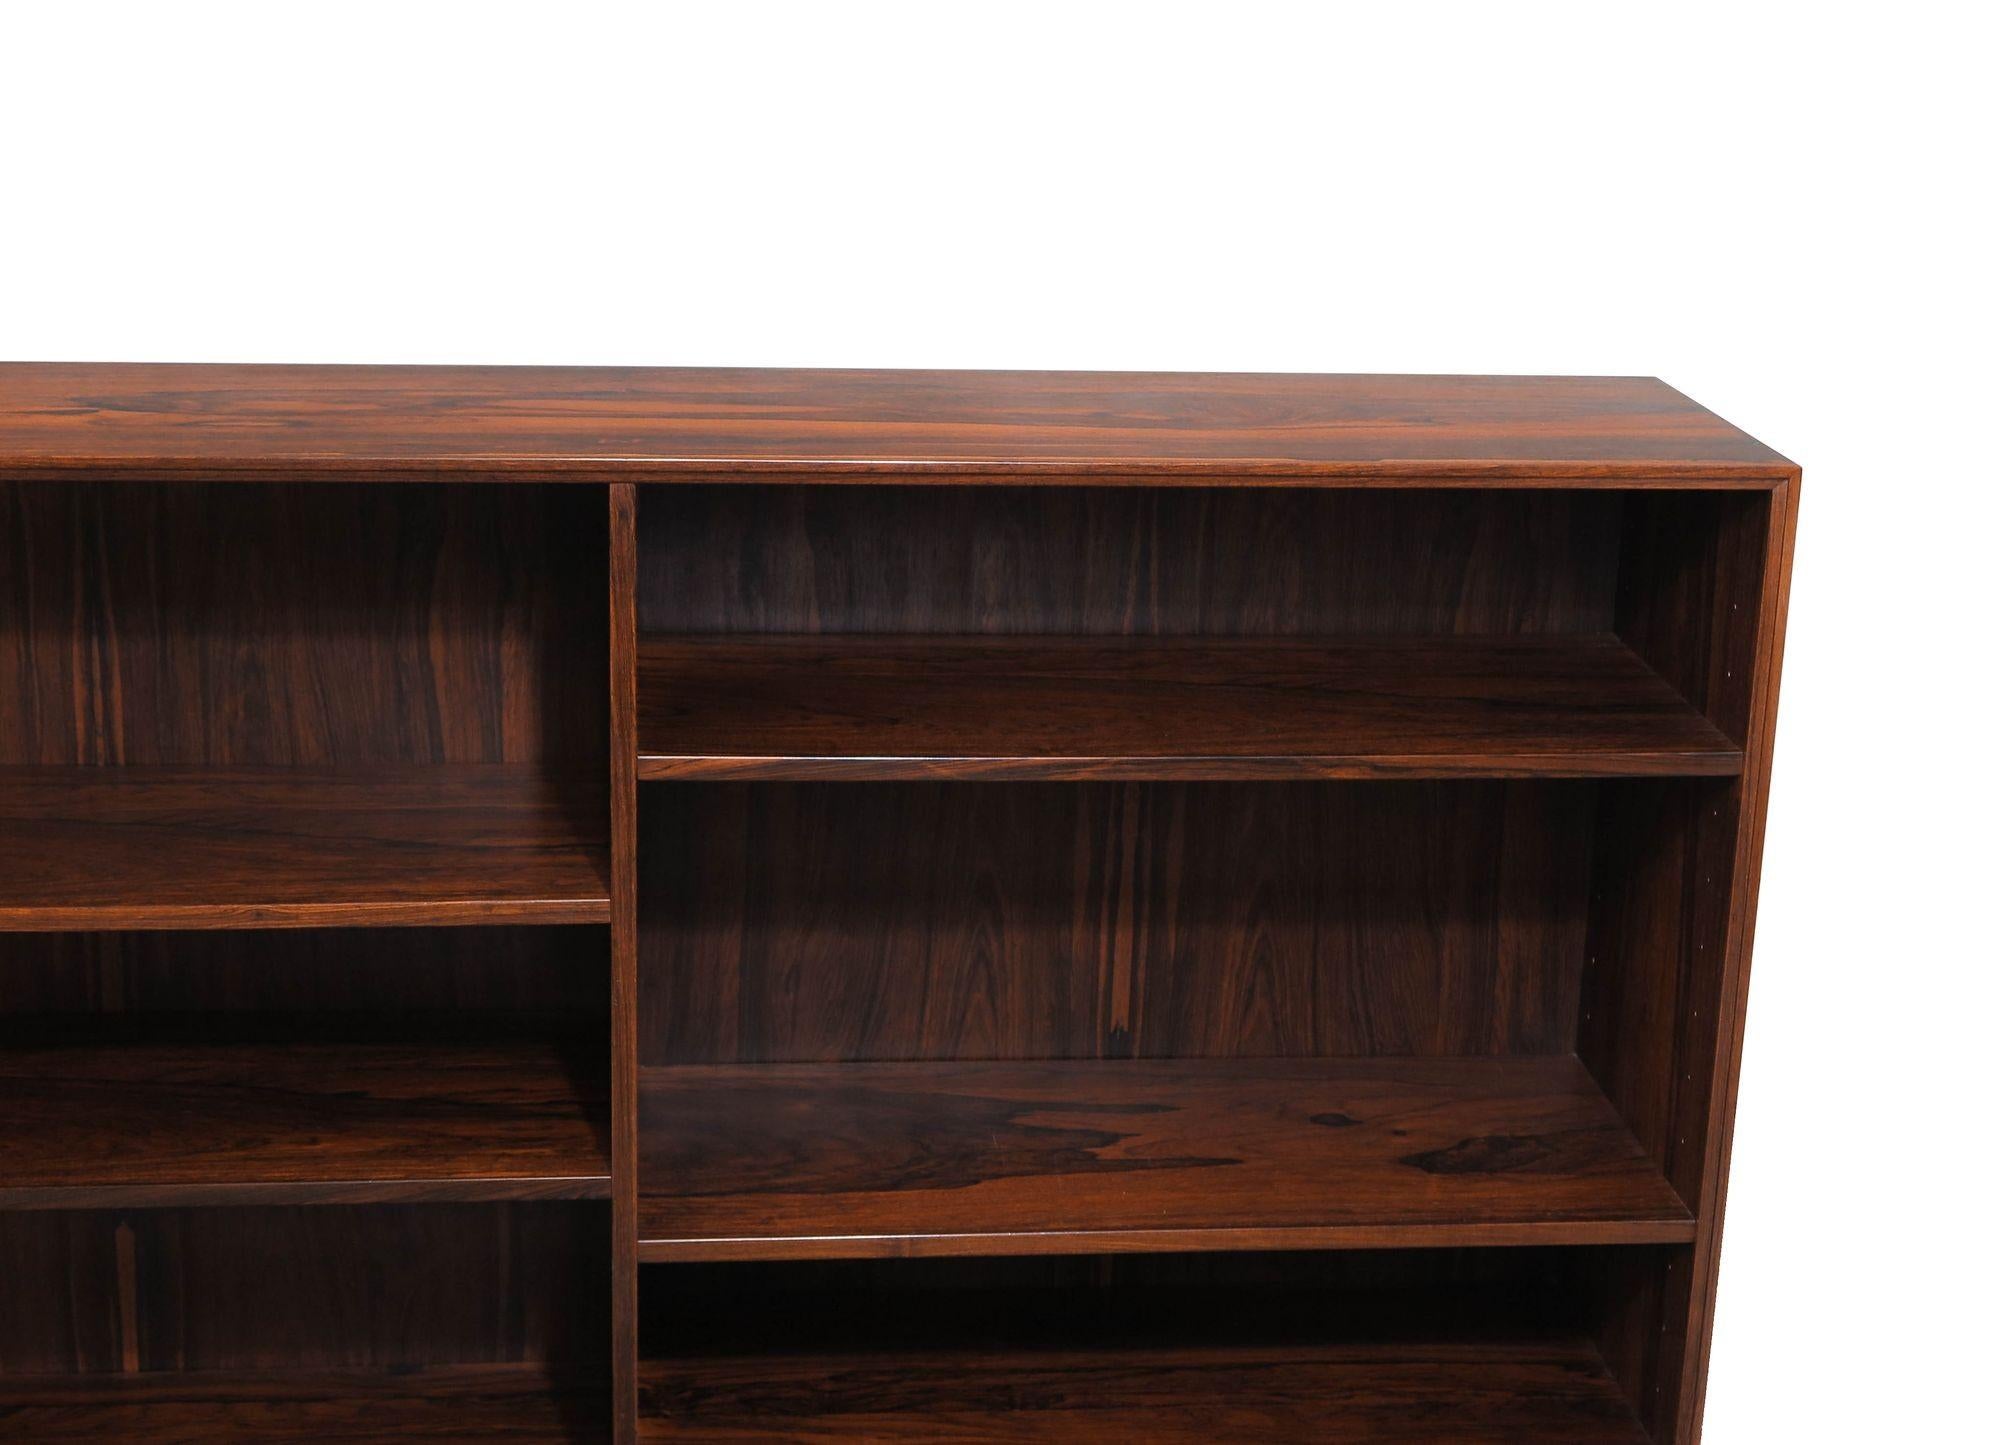 Danish Rosewood Bookcase In Excellent Condition For Sale In Oakland, CA